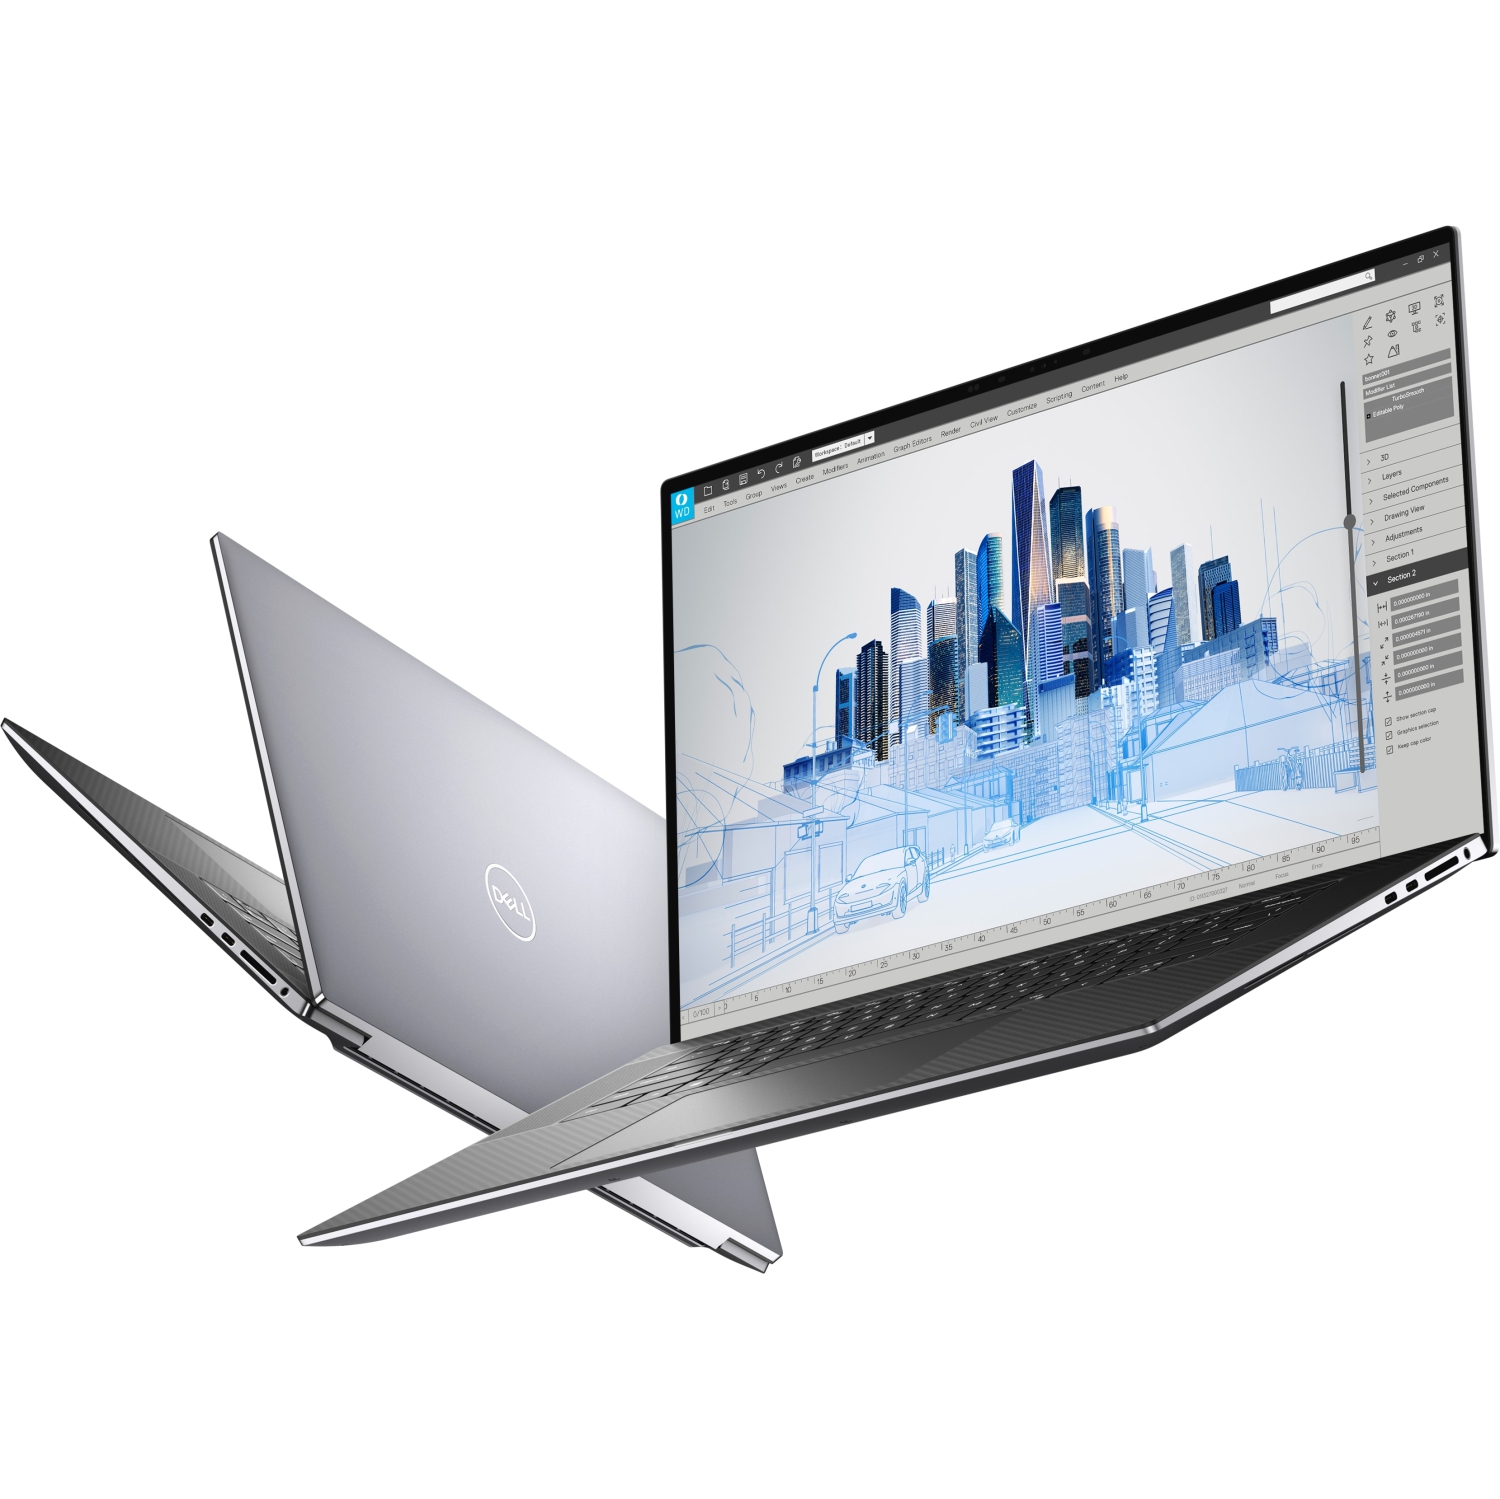 Refurbished (Excellent) - Dell Precision 5000 5760 Workstation Laptop (2021), 17" FHD+, Core i7, 1TB SSD, 32GB RAM, RTX A2000, 4.6 GHz, 11th Gen CPU Certified Refurbished